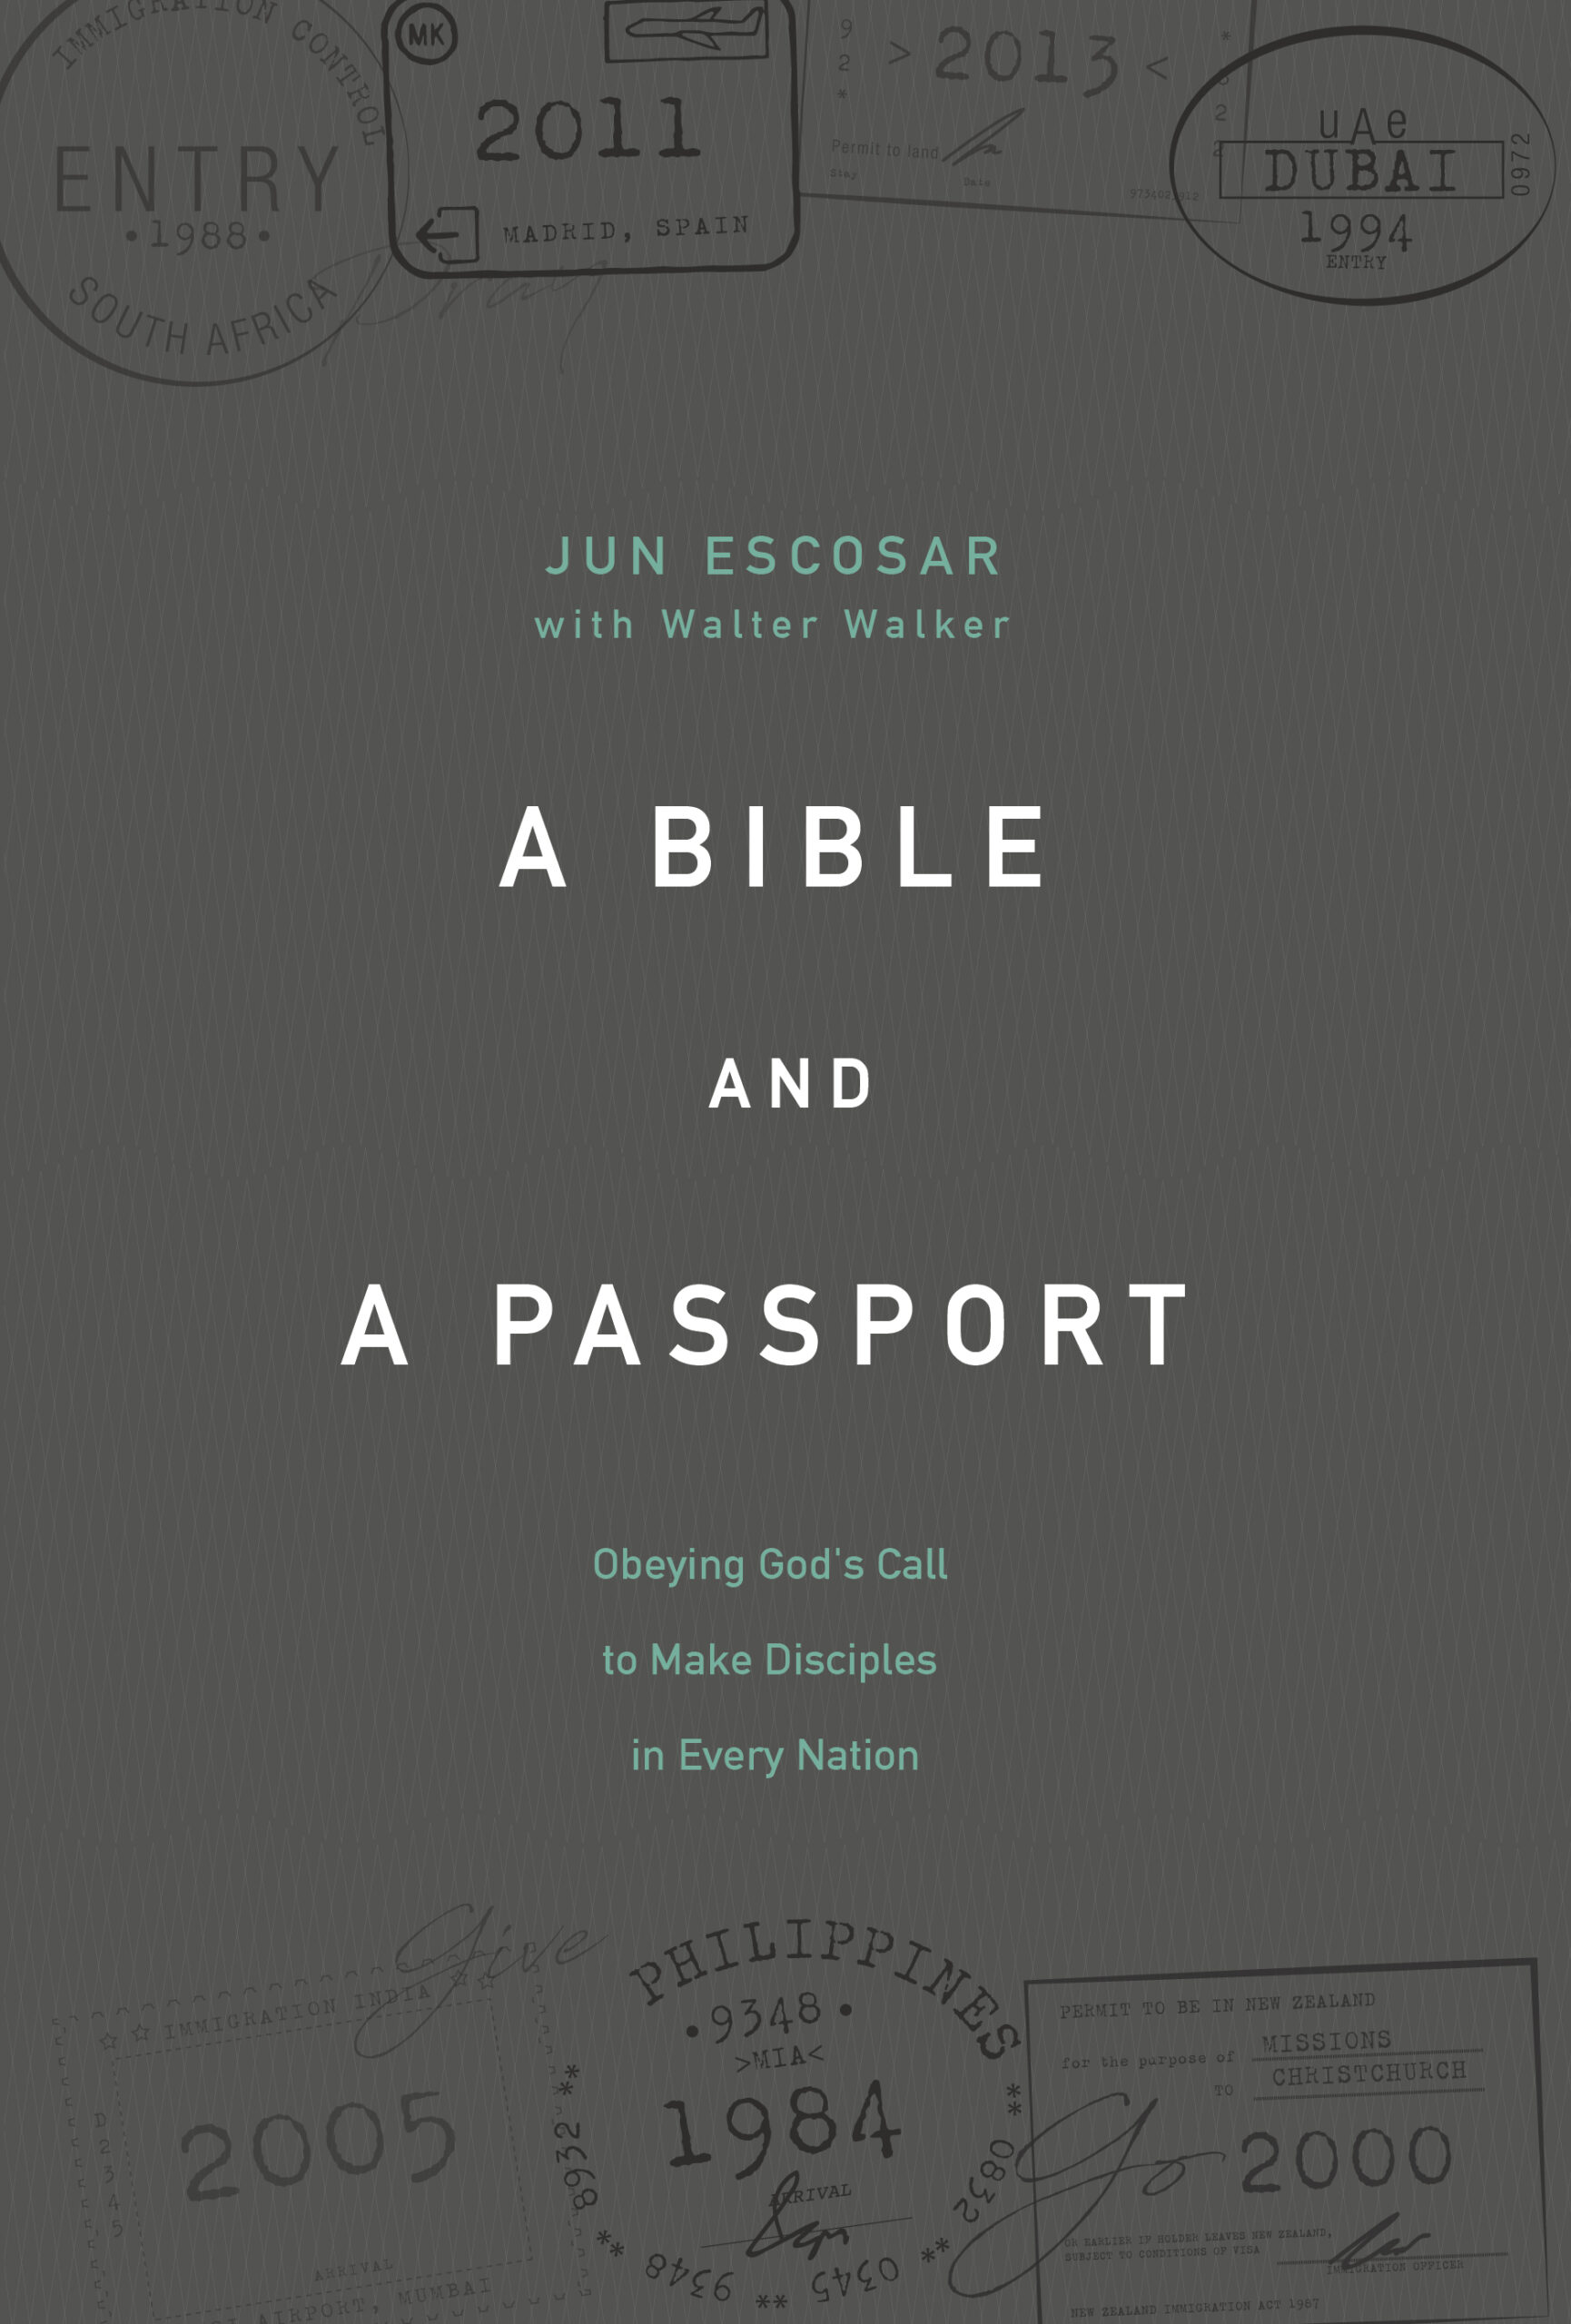 A Bible and a Passport: Obeying the Call to Make Disciples in Every Nation-image